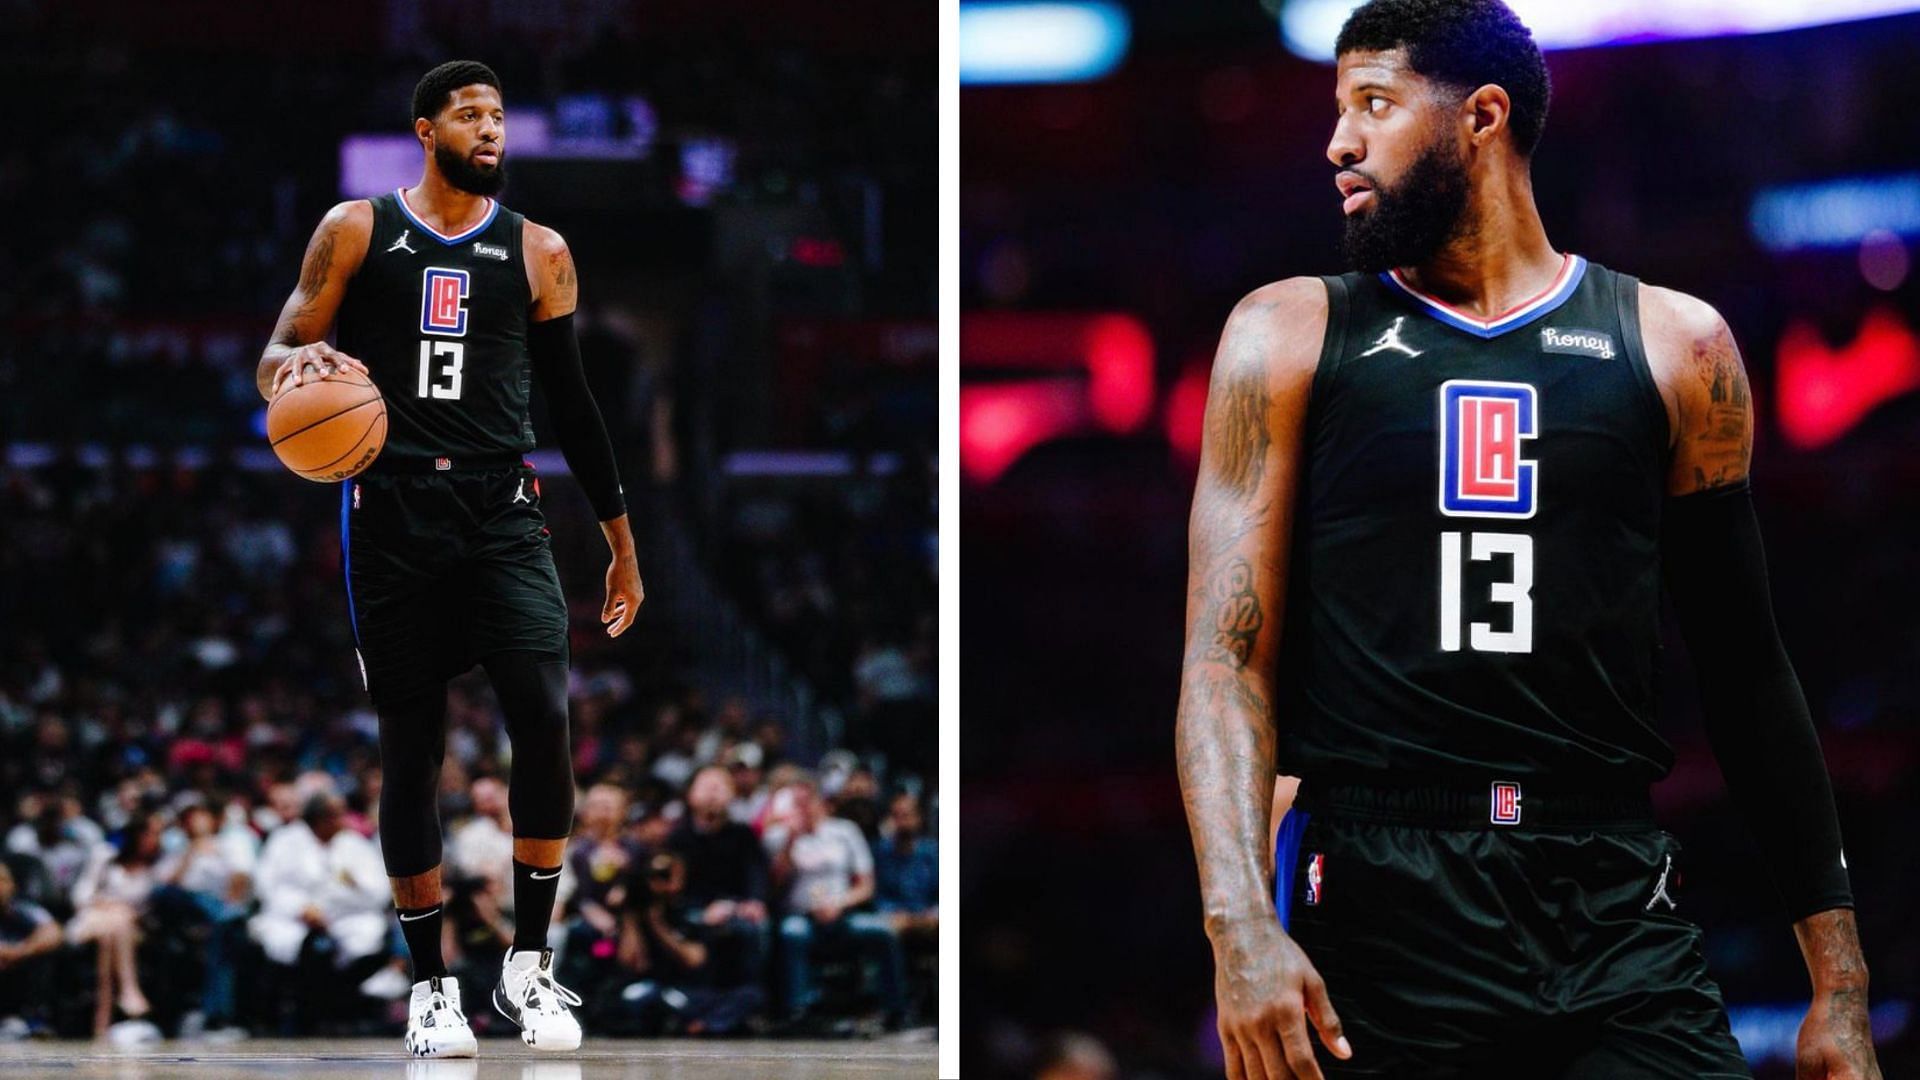 Los Angeles Clippers guard Paul George sustained a serious leg injury. (Photo via Instagram/ygtrece)